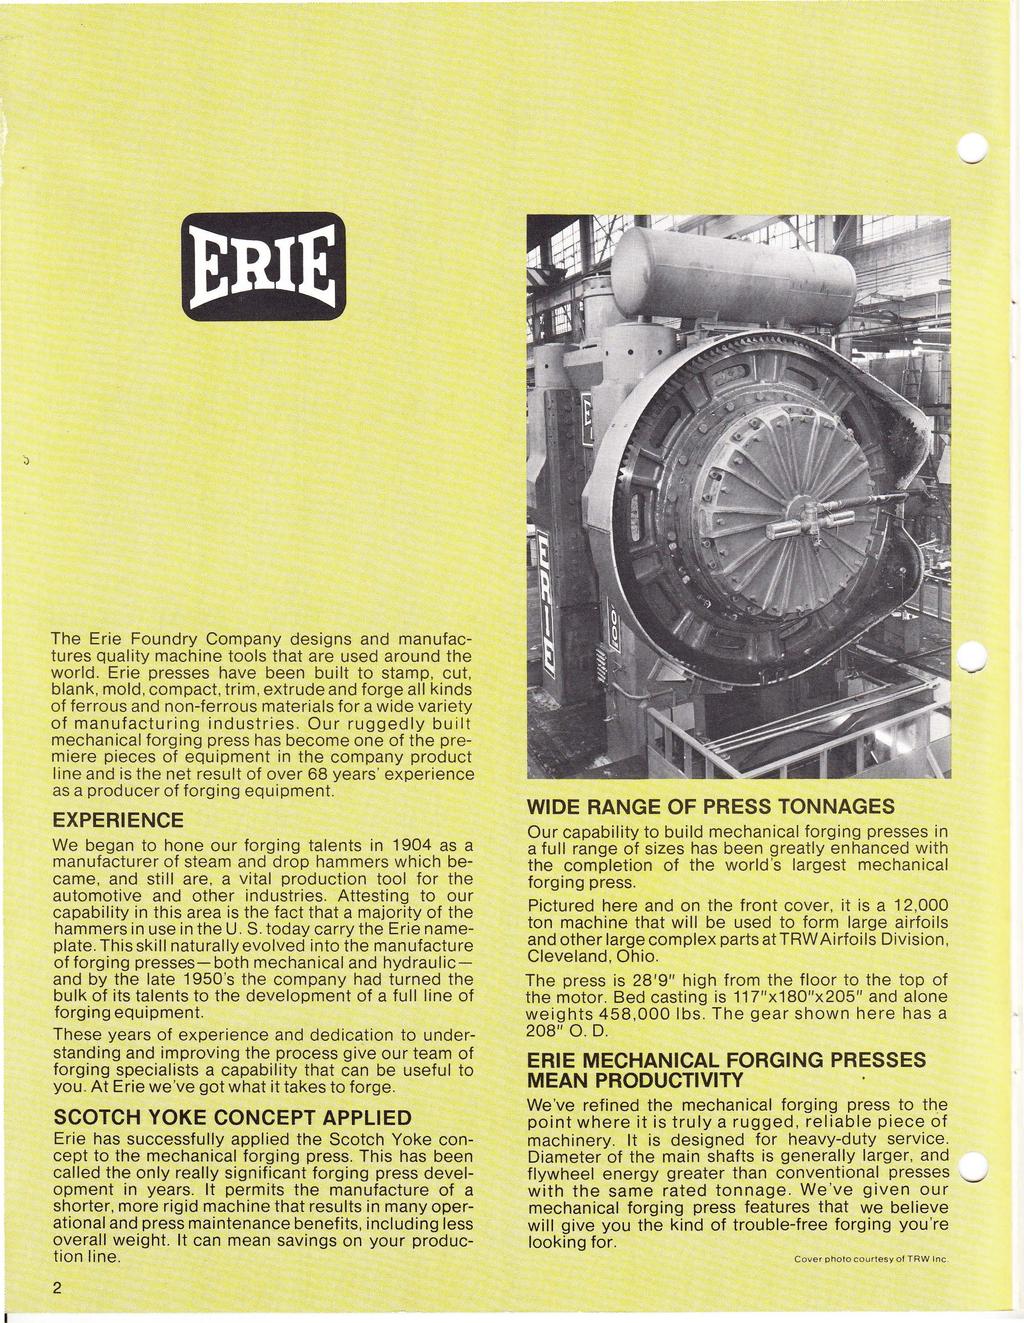 The Erie Foundry Company designs and manufactu res quality machine tools that are used around the world.